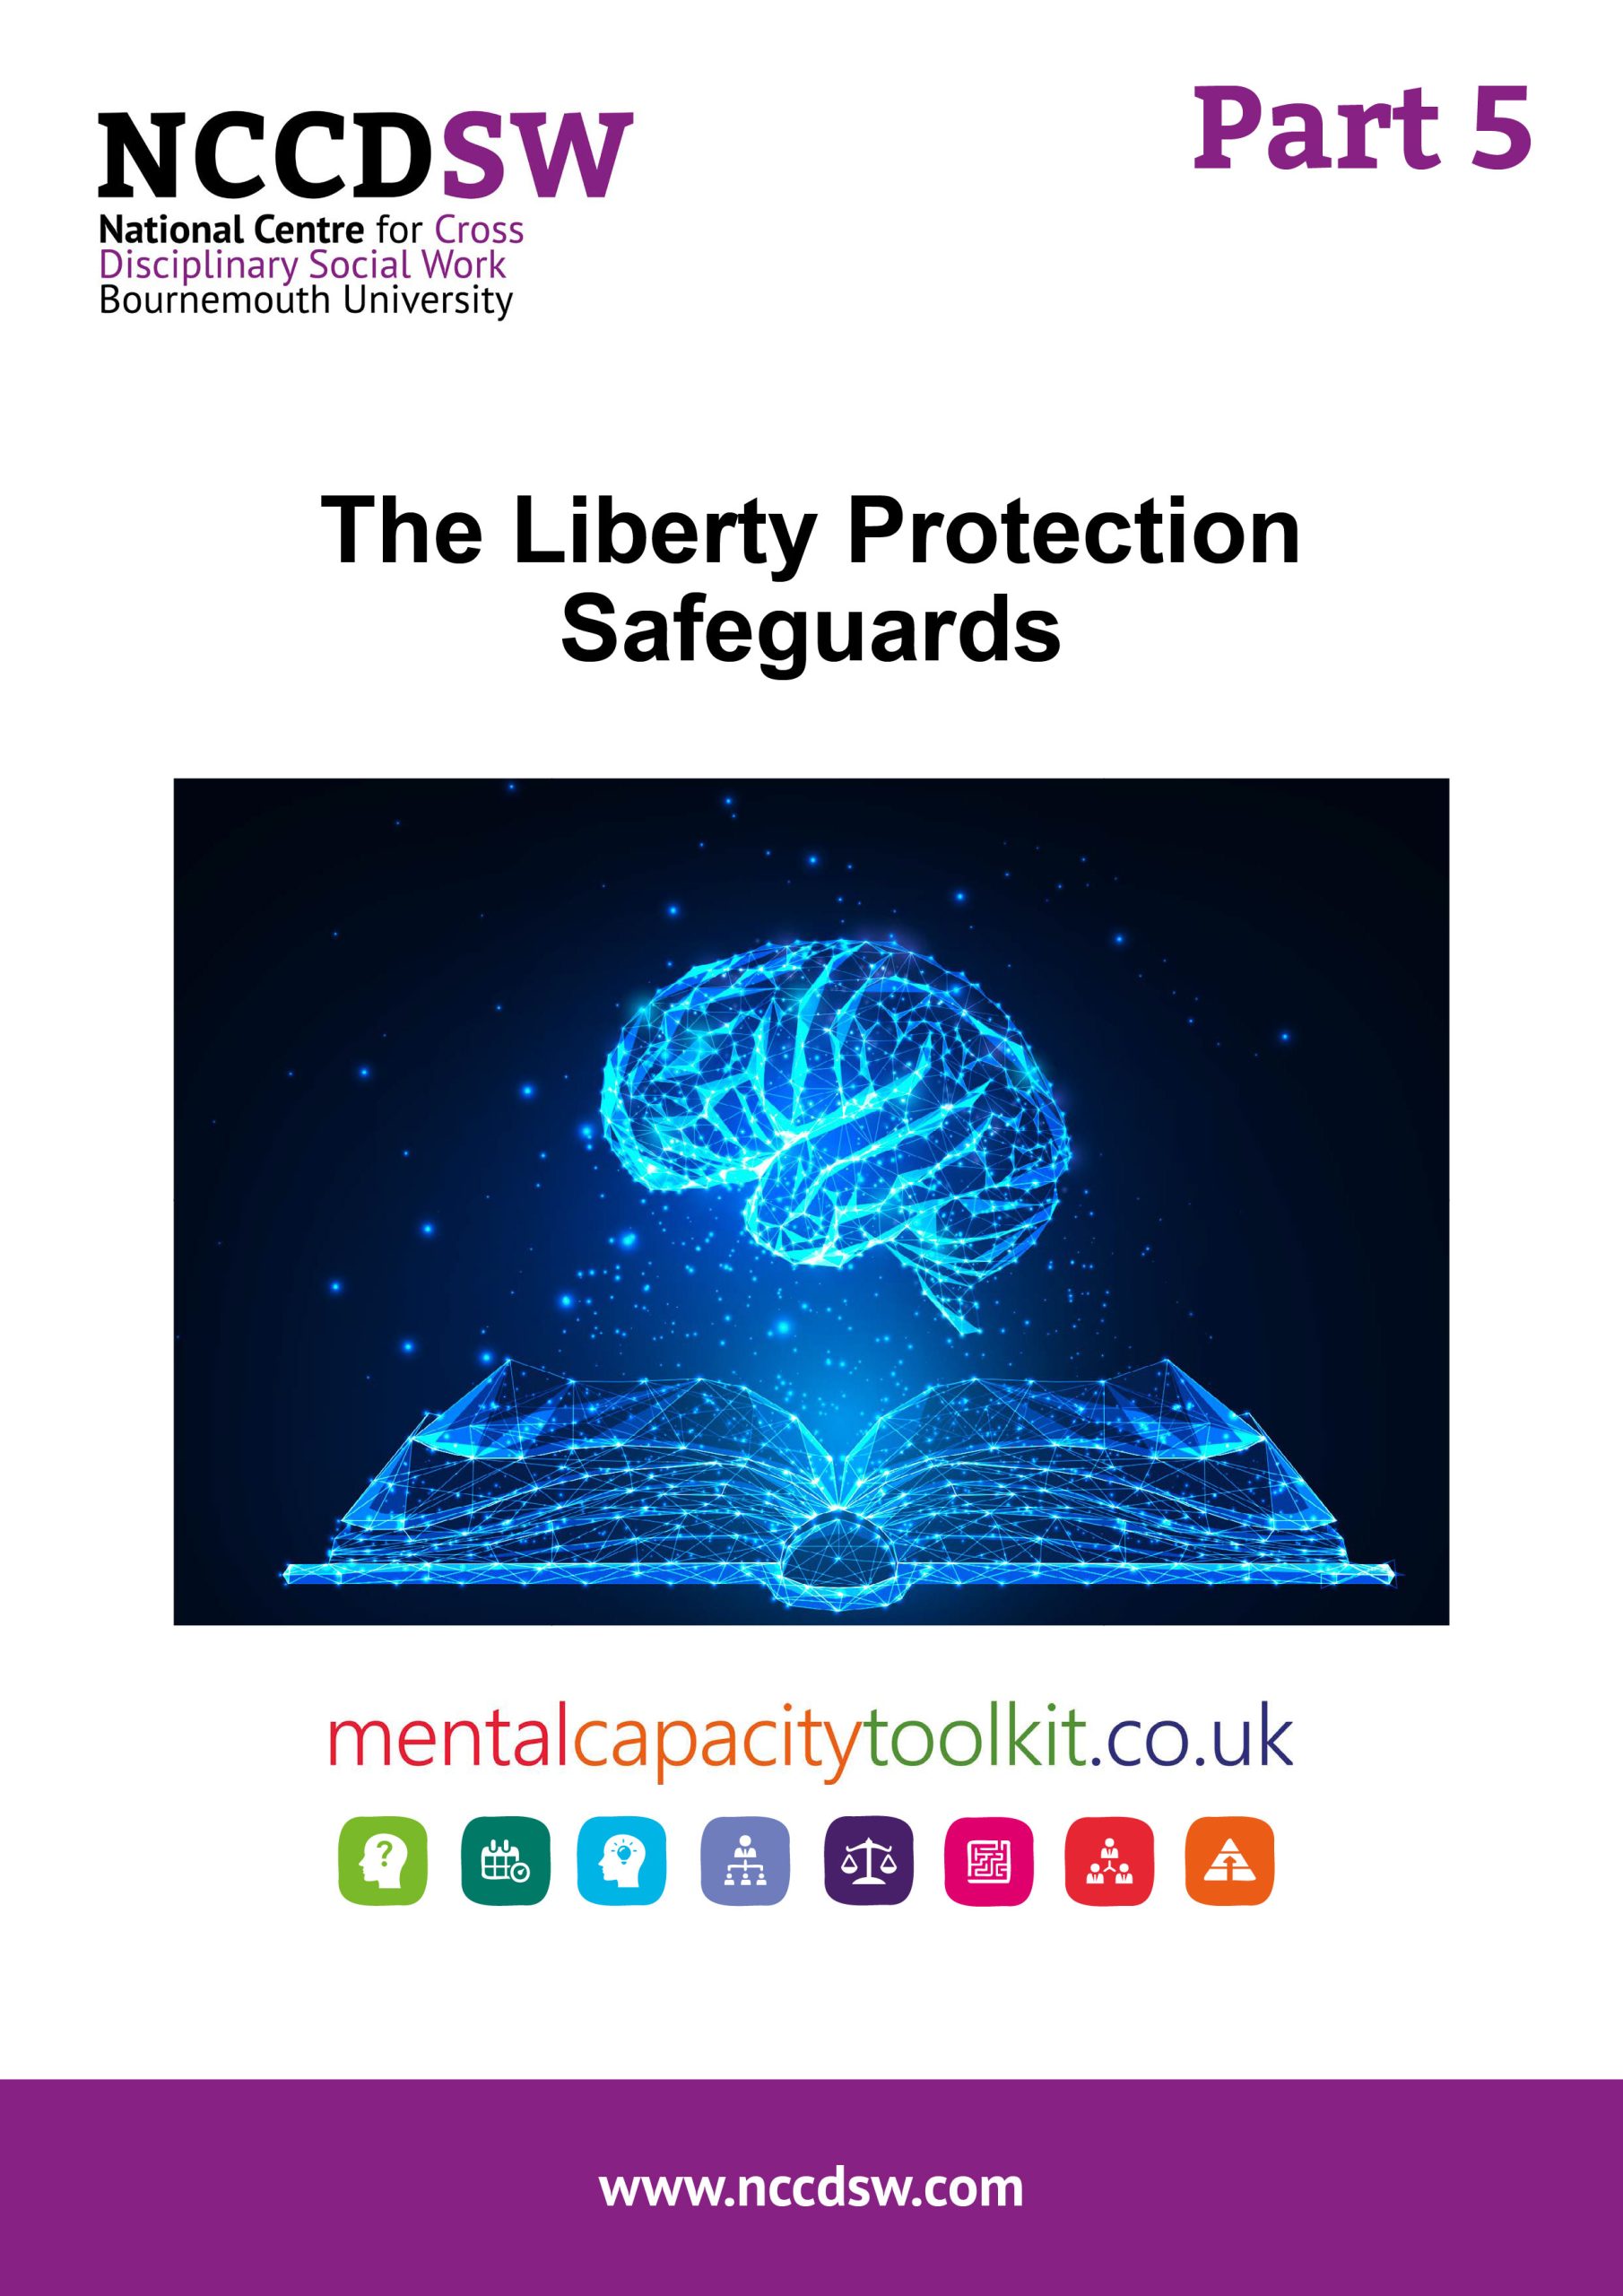 New Publication: The Liberty Protection Safeguards